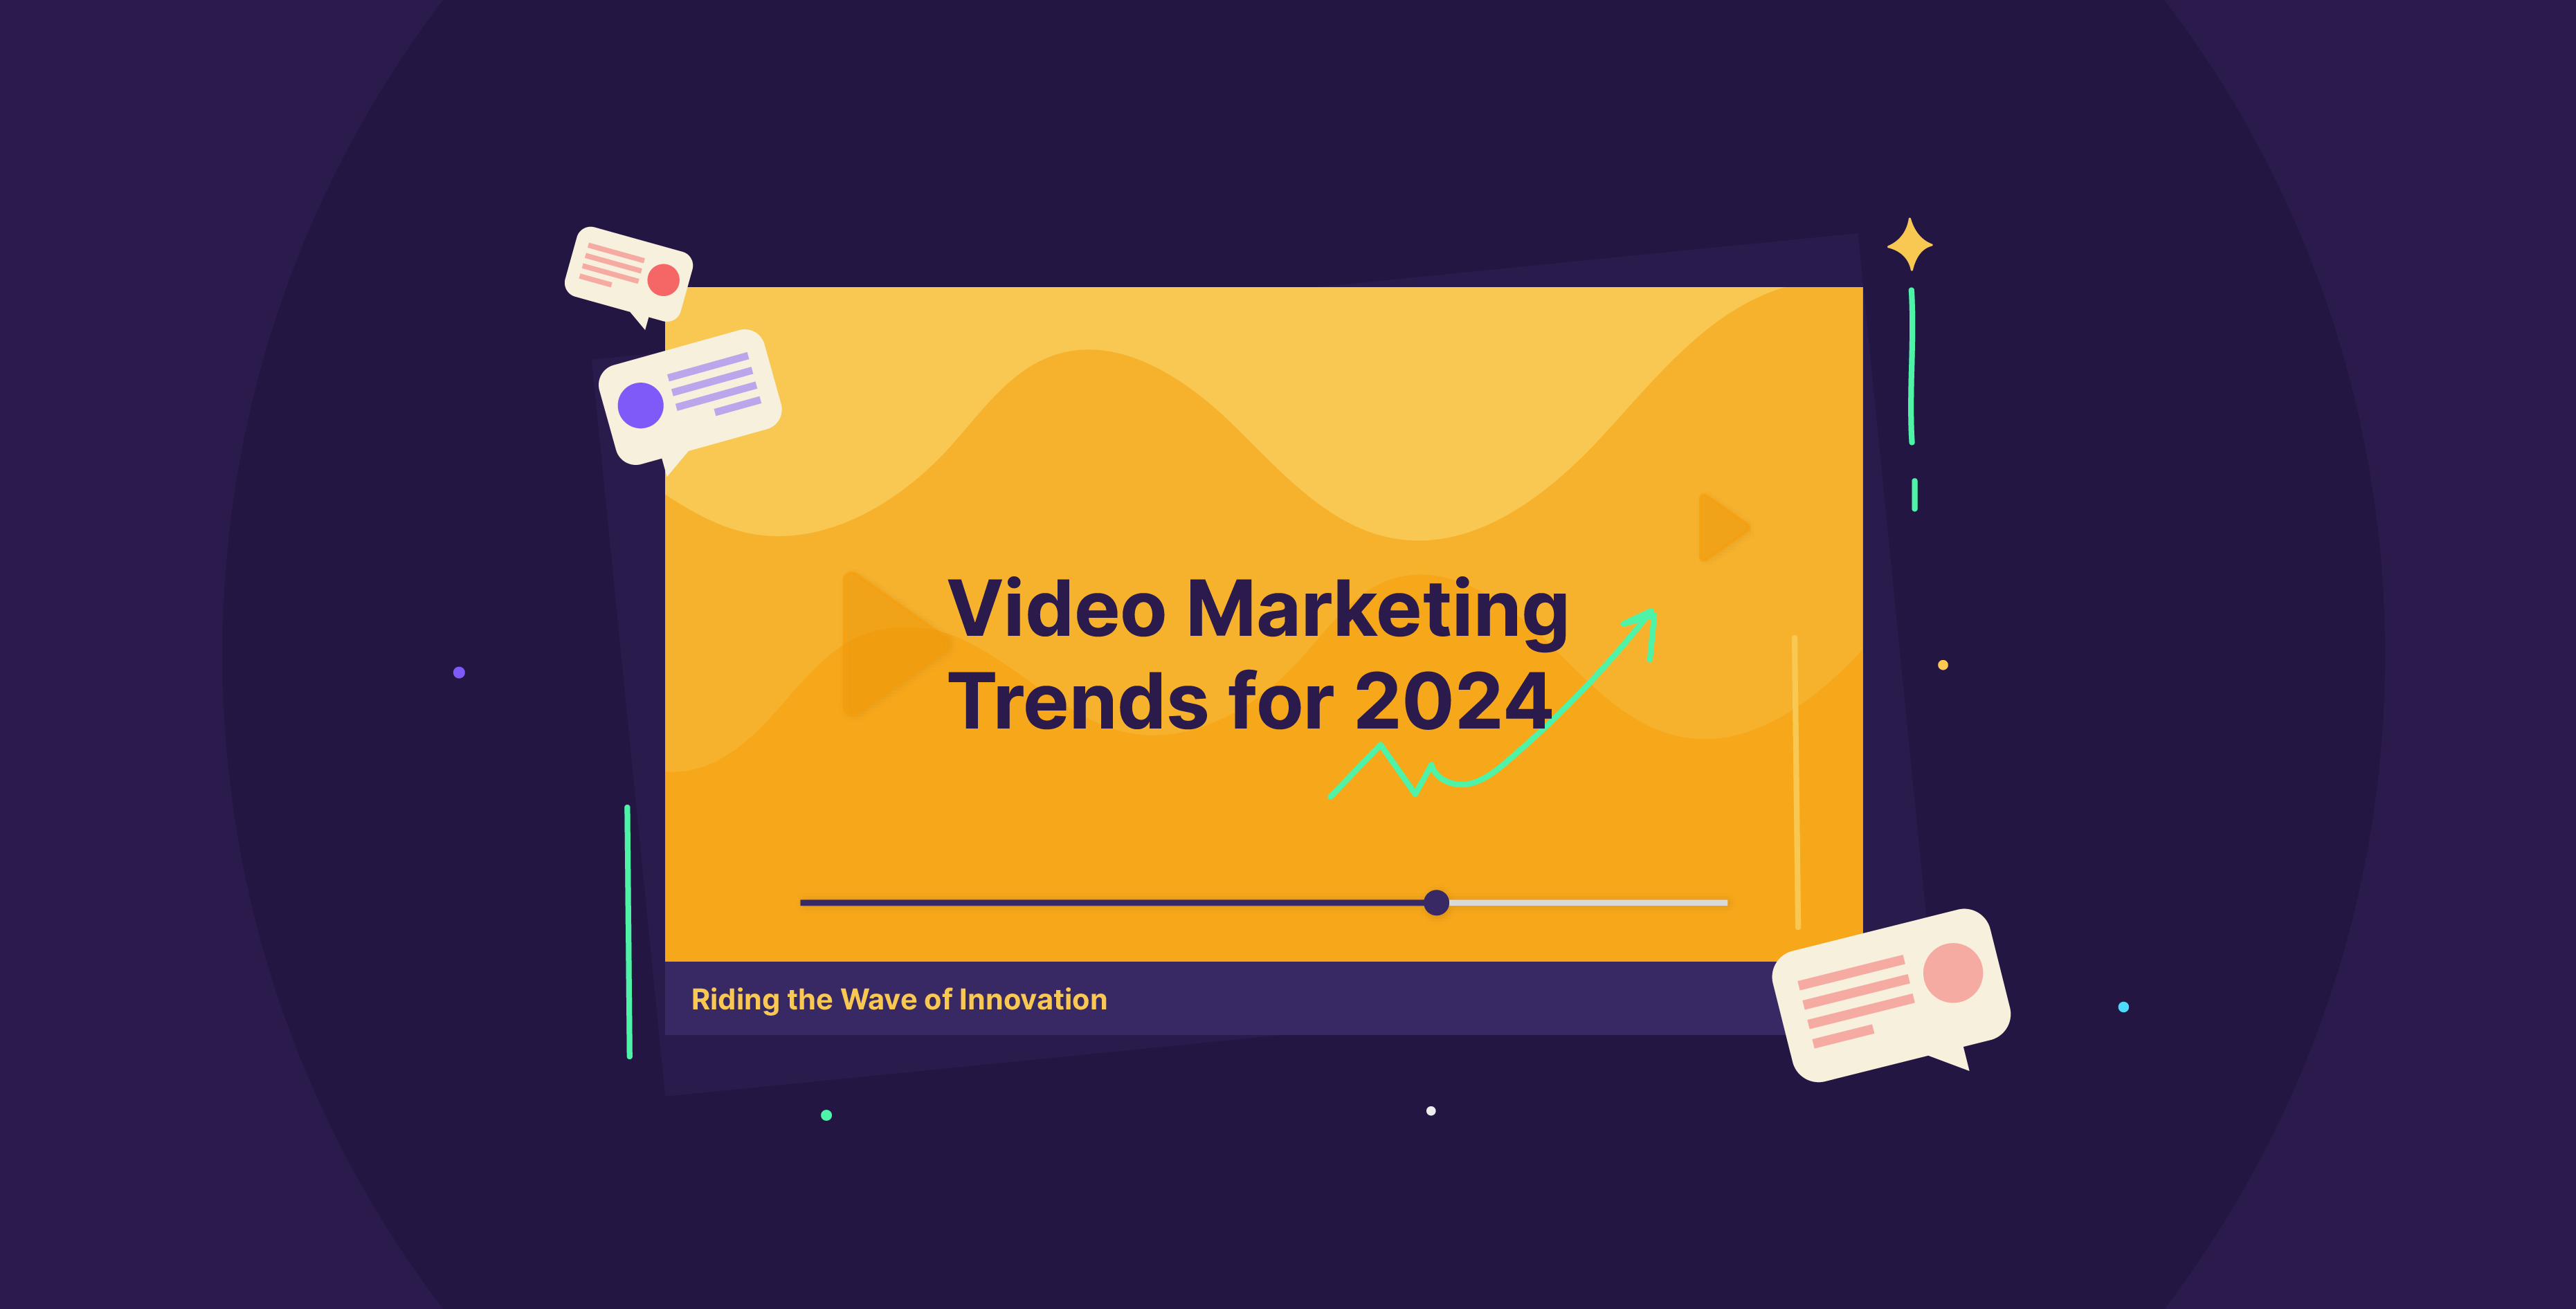 Video Marketing Trends for 2024: Riding the wave of innovation